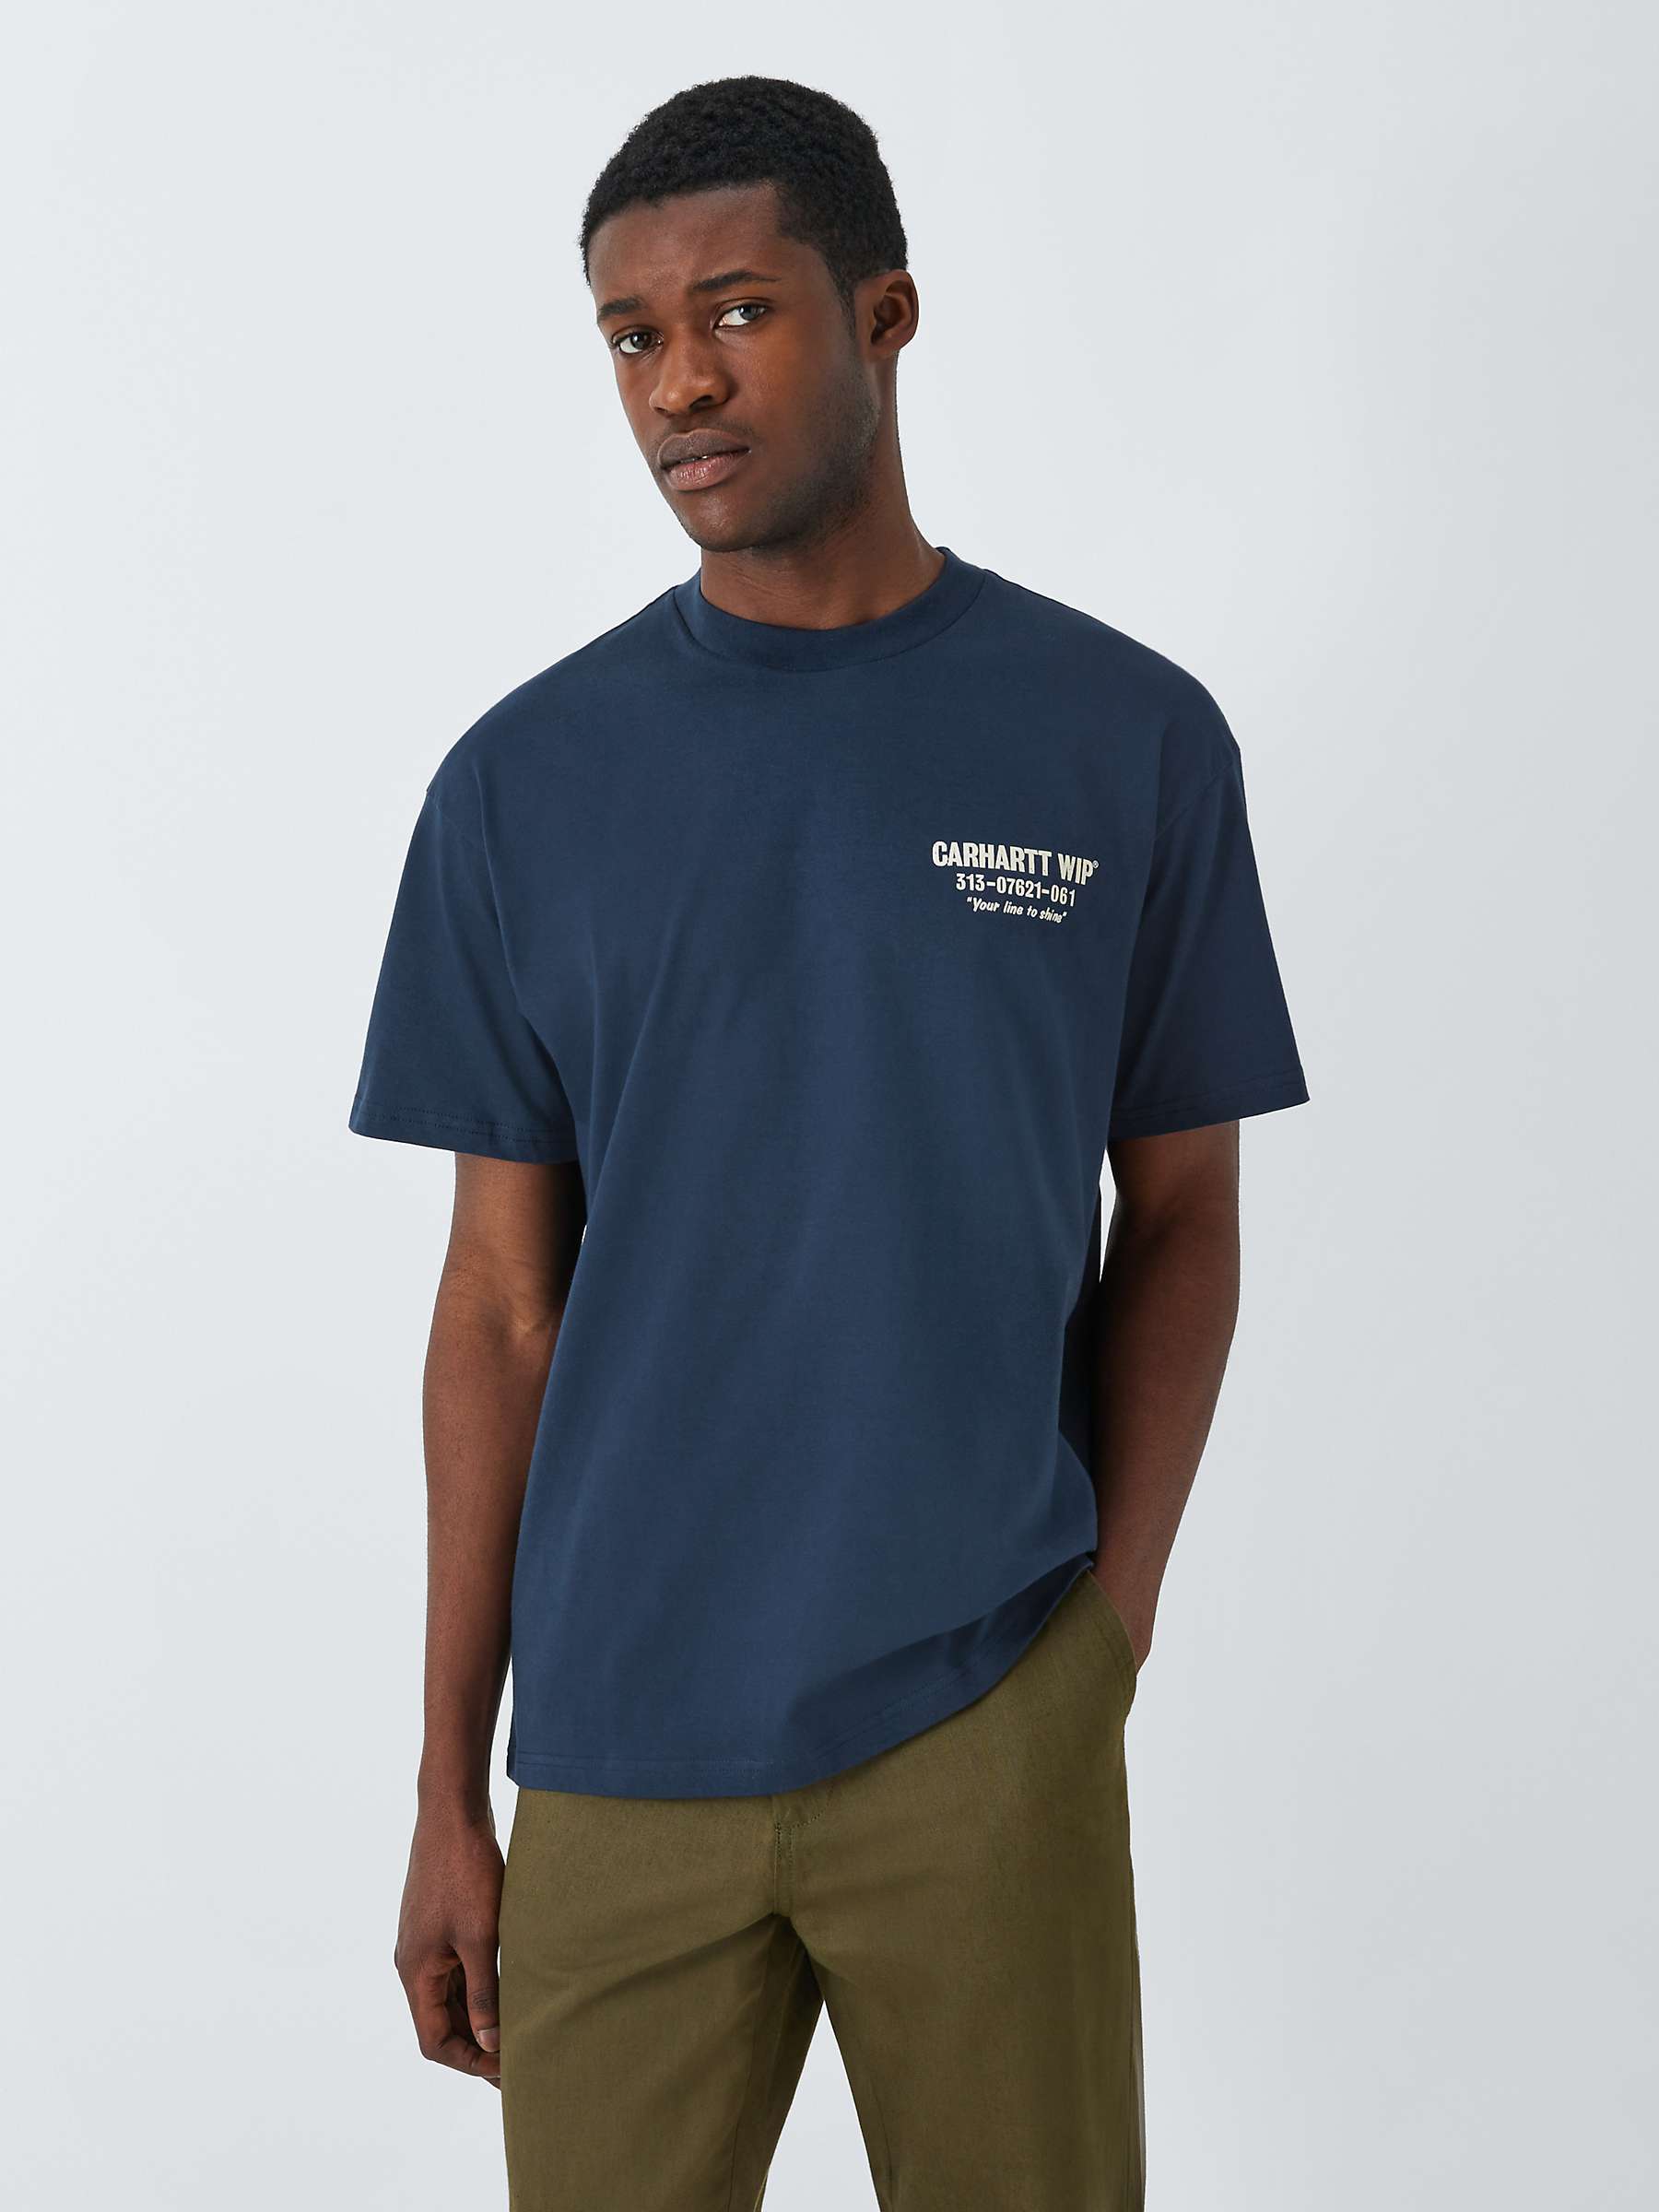 Buy Carhartt WIP Short Sleeve Less Troubles T-Shirt, Blue Online at johnlewis.com